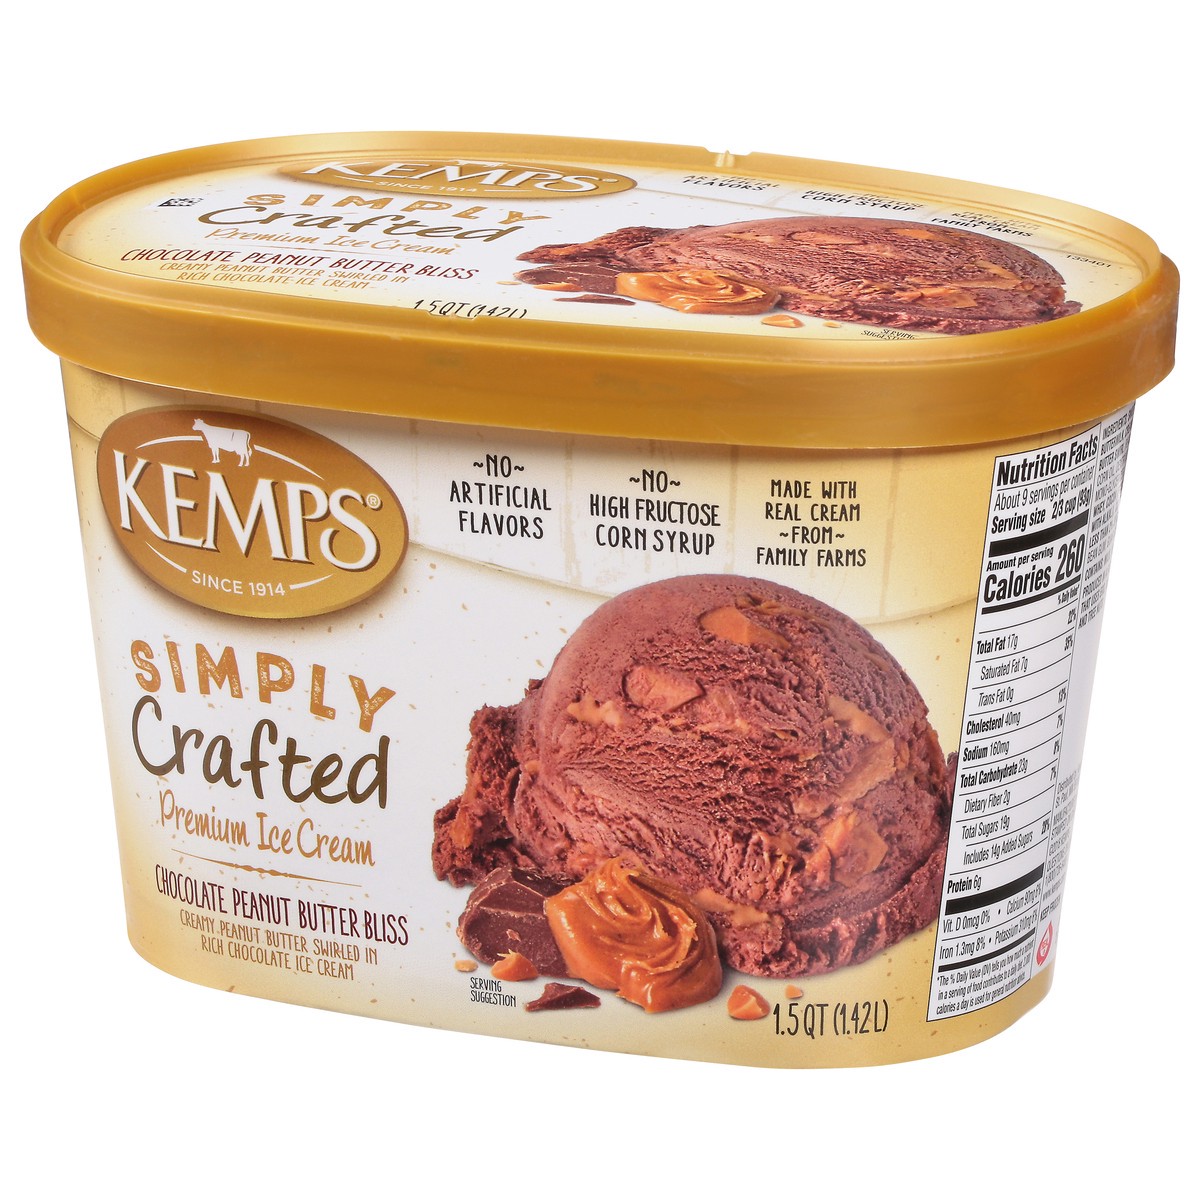 slide 3 of 9, Kemps Simply Crafted Premium Chocolate Peanut Butter Bliss Ice Cream 1.5 qt, 1.5 qt